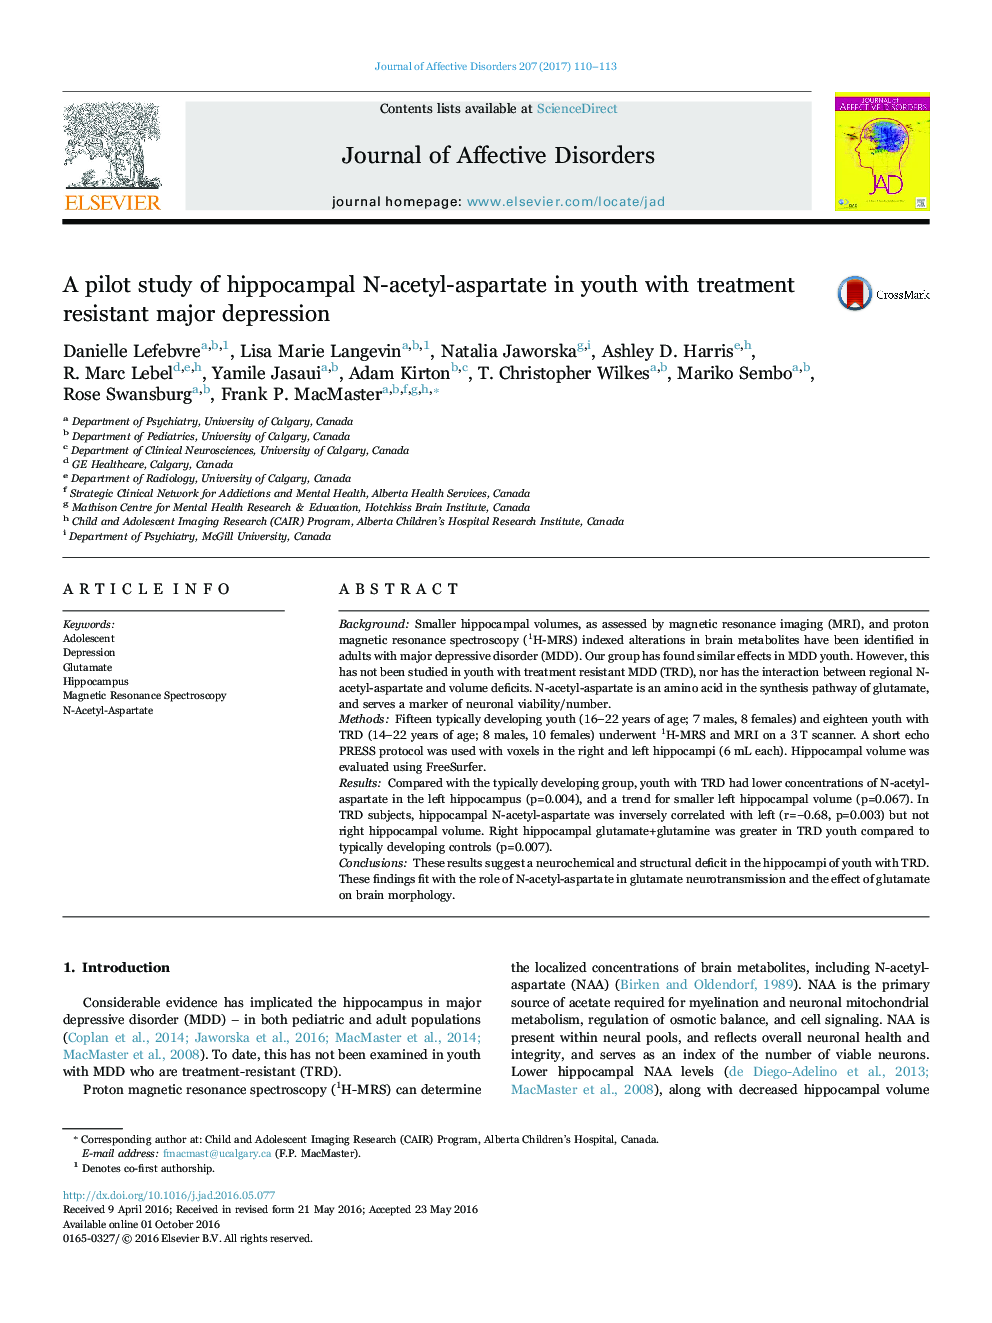 A pilot study of hippocampal N-acetyl-aspartate in youth with treatment resistant major depression